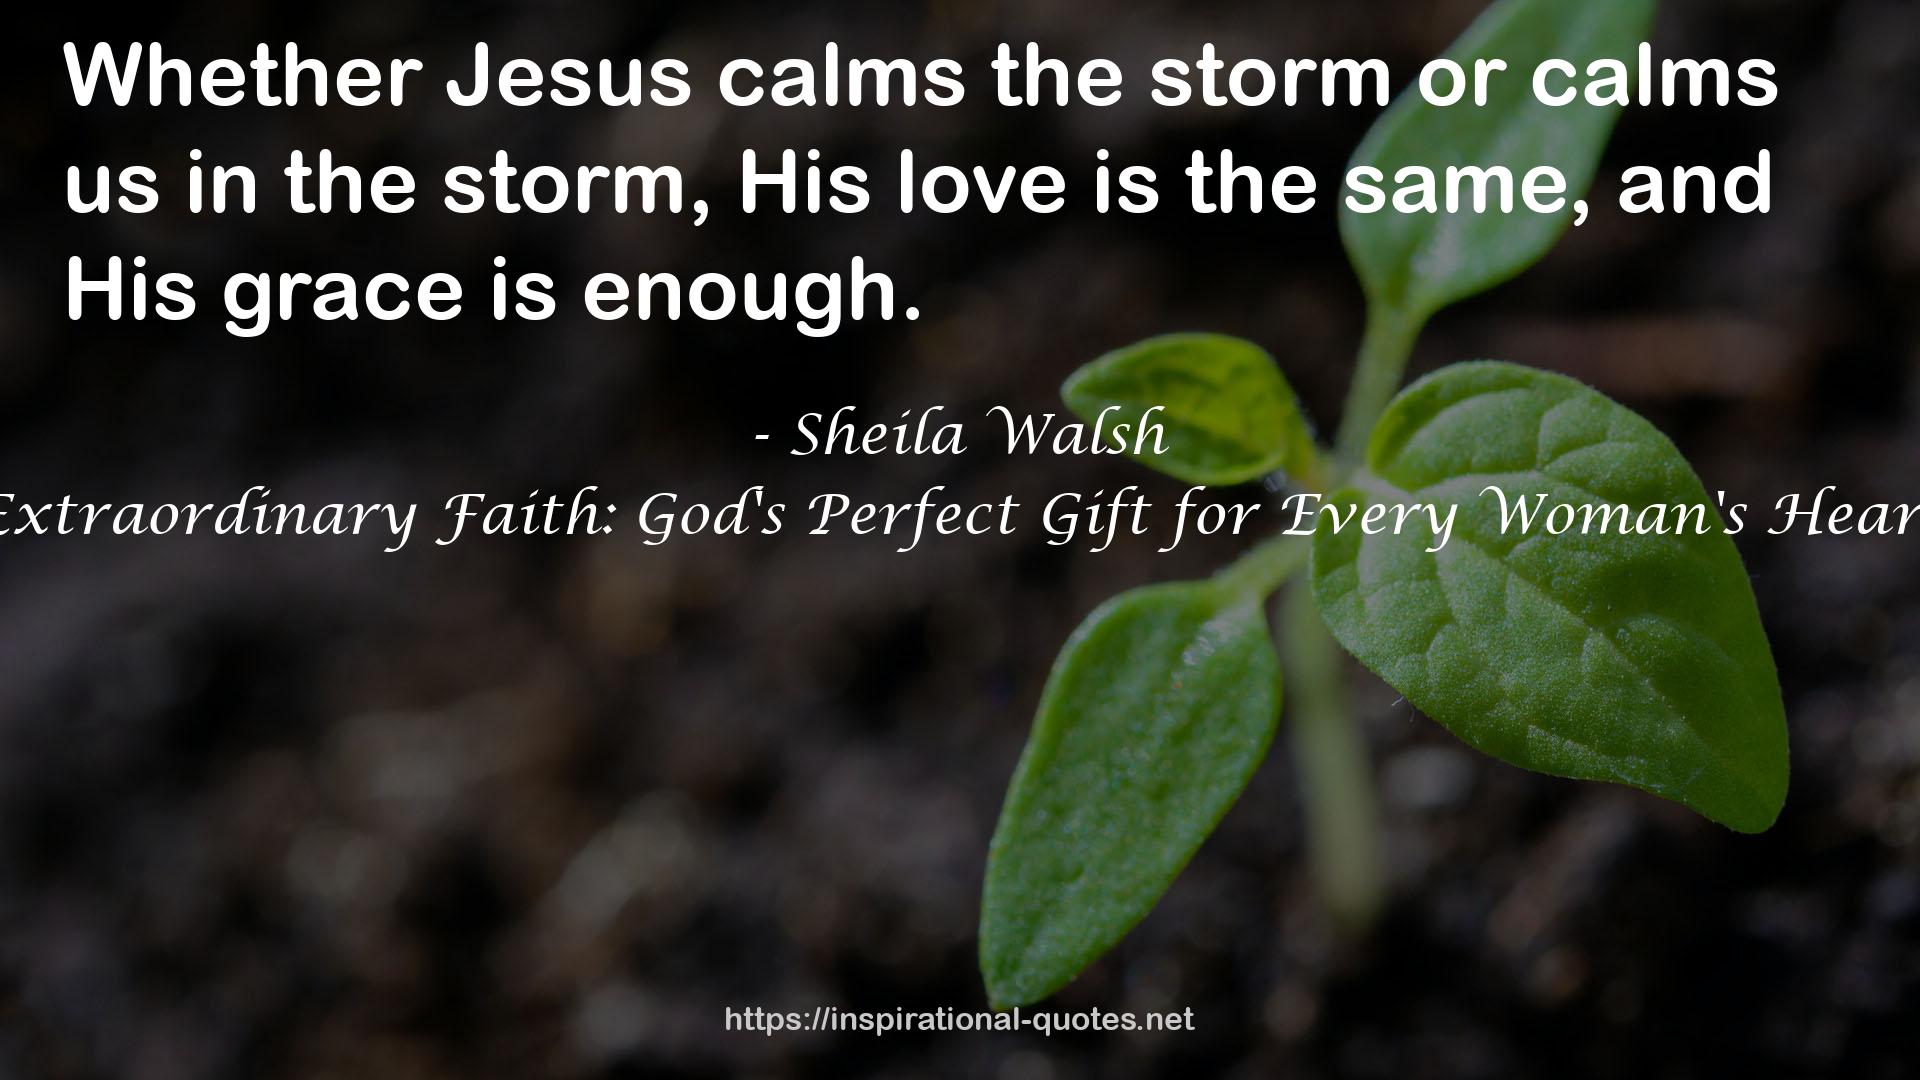 Extraordinary Faith: God's Perfect Gift for Every Woman's Heart QUOTES